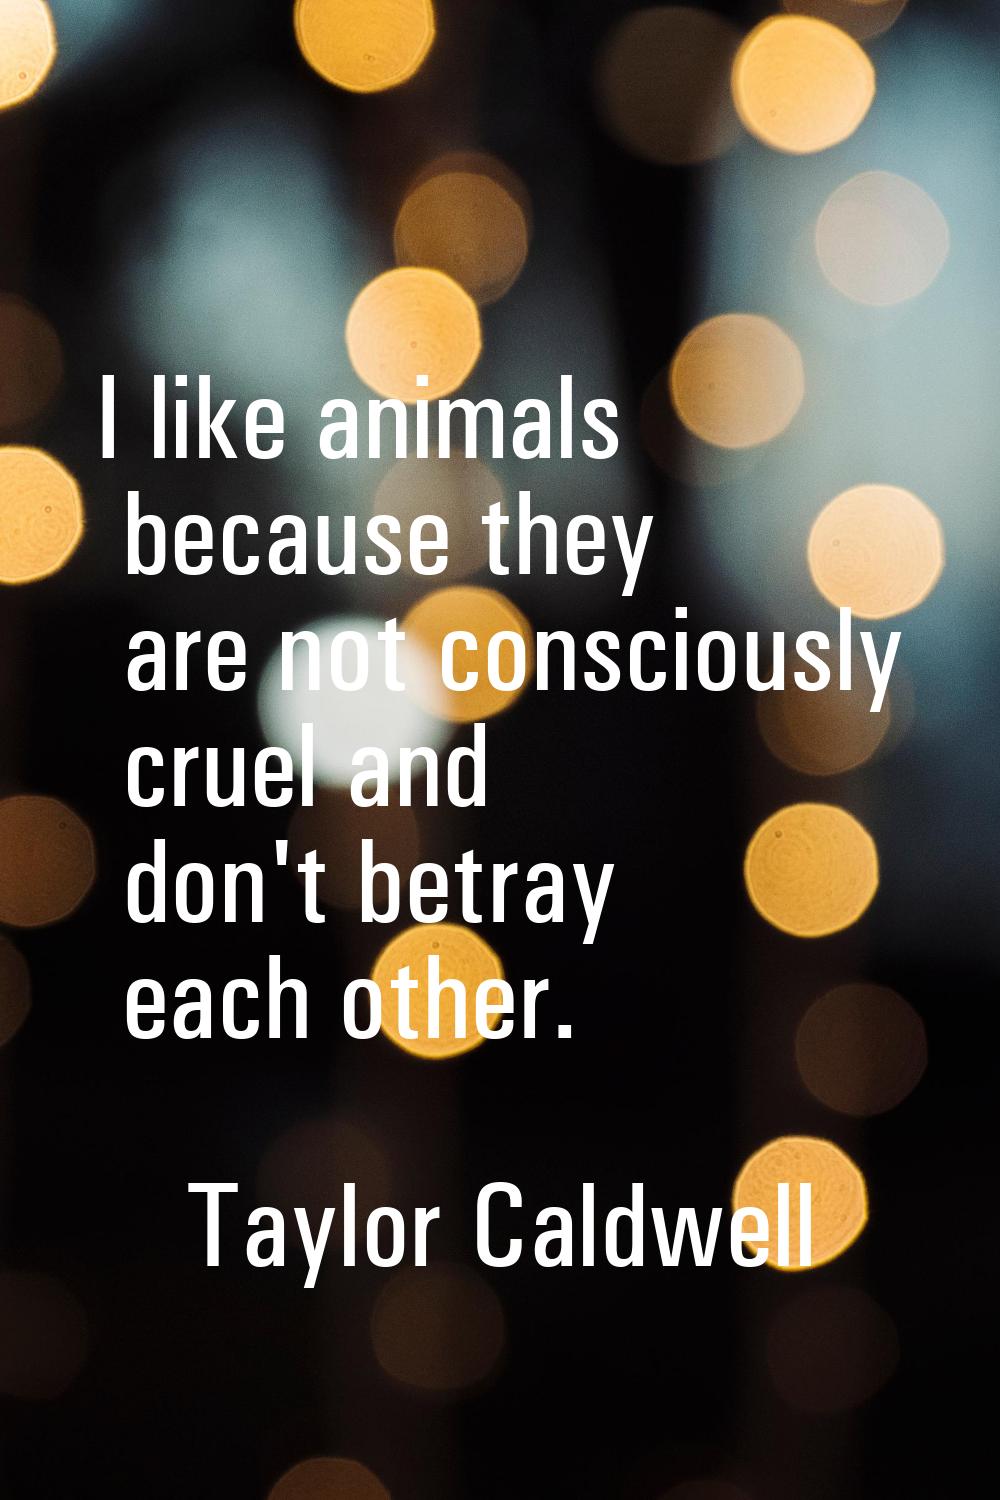 I like animals because they are not consciously cruel and don't betray each other.